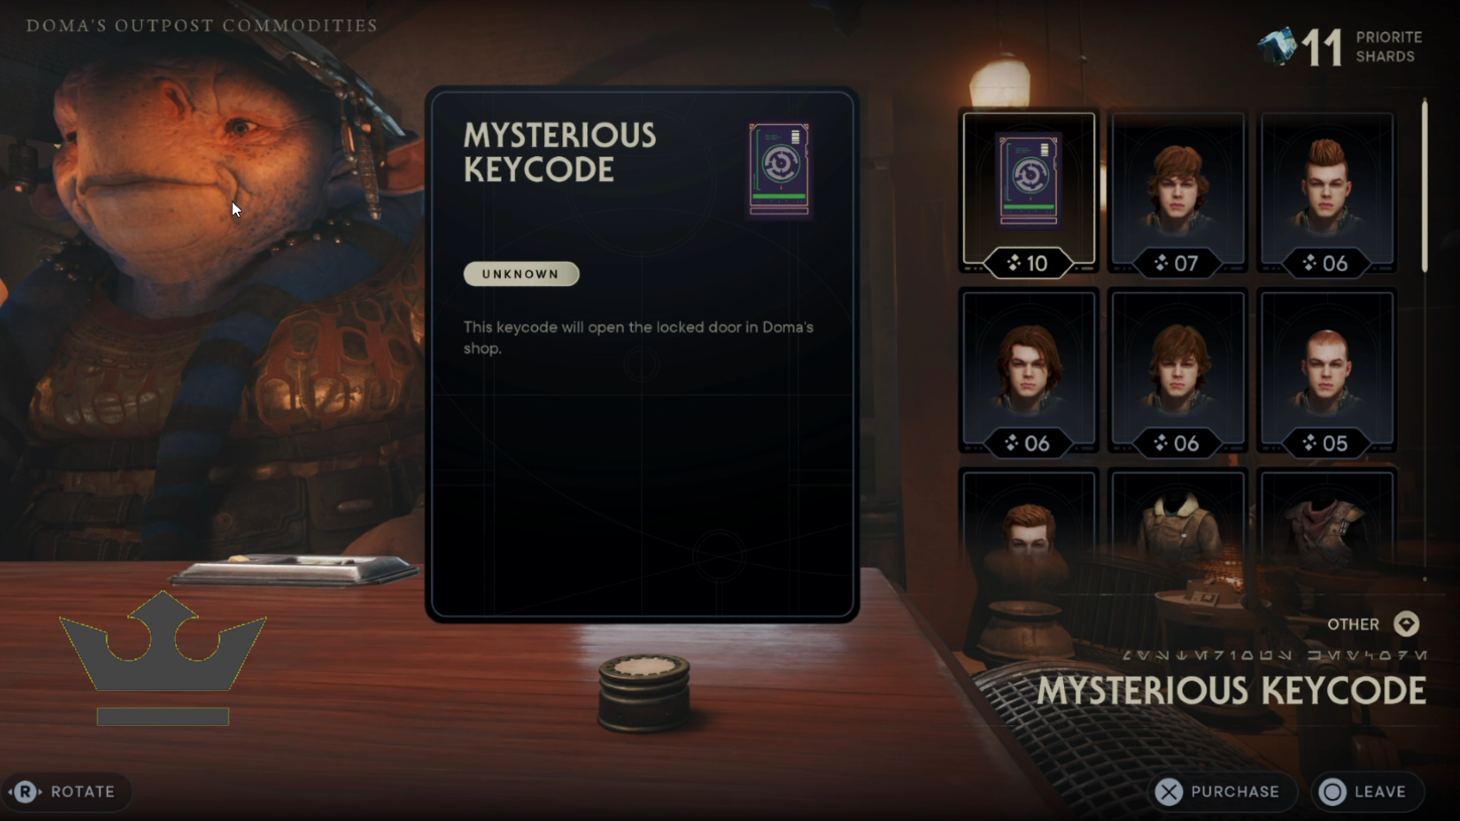 Star Wars Jedi Survivor Mysterious Keycode: Doma's keycode can be seen